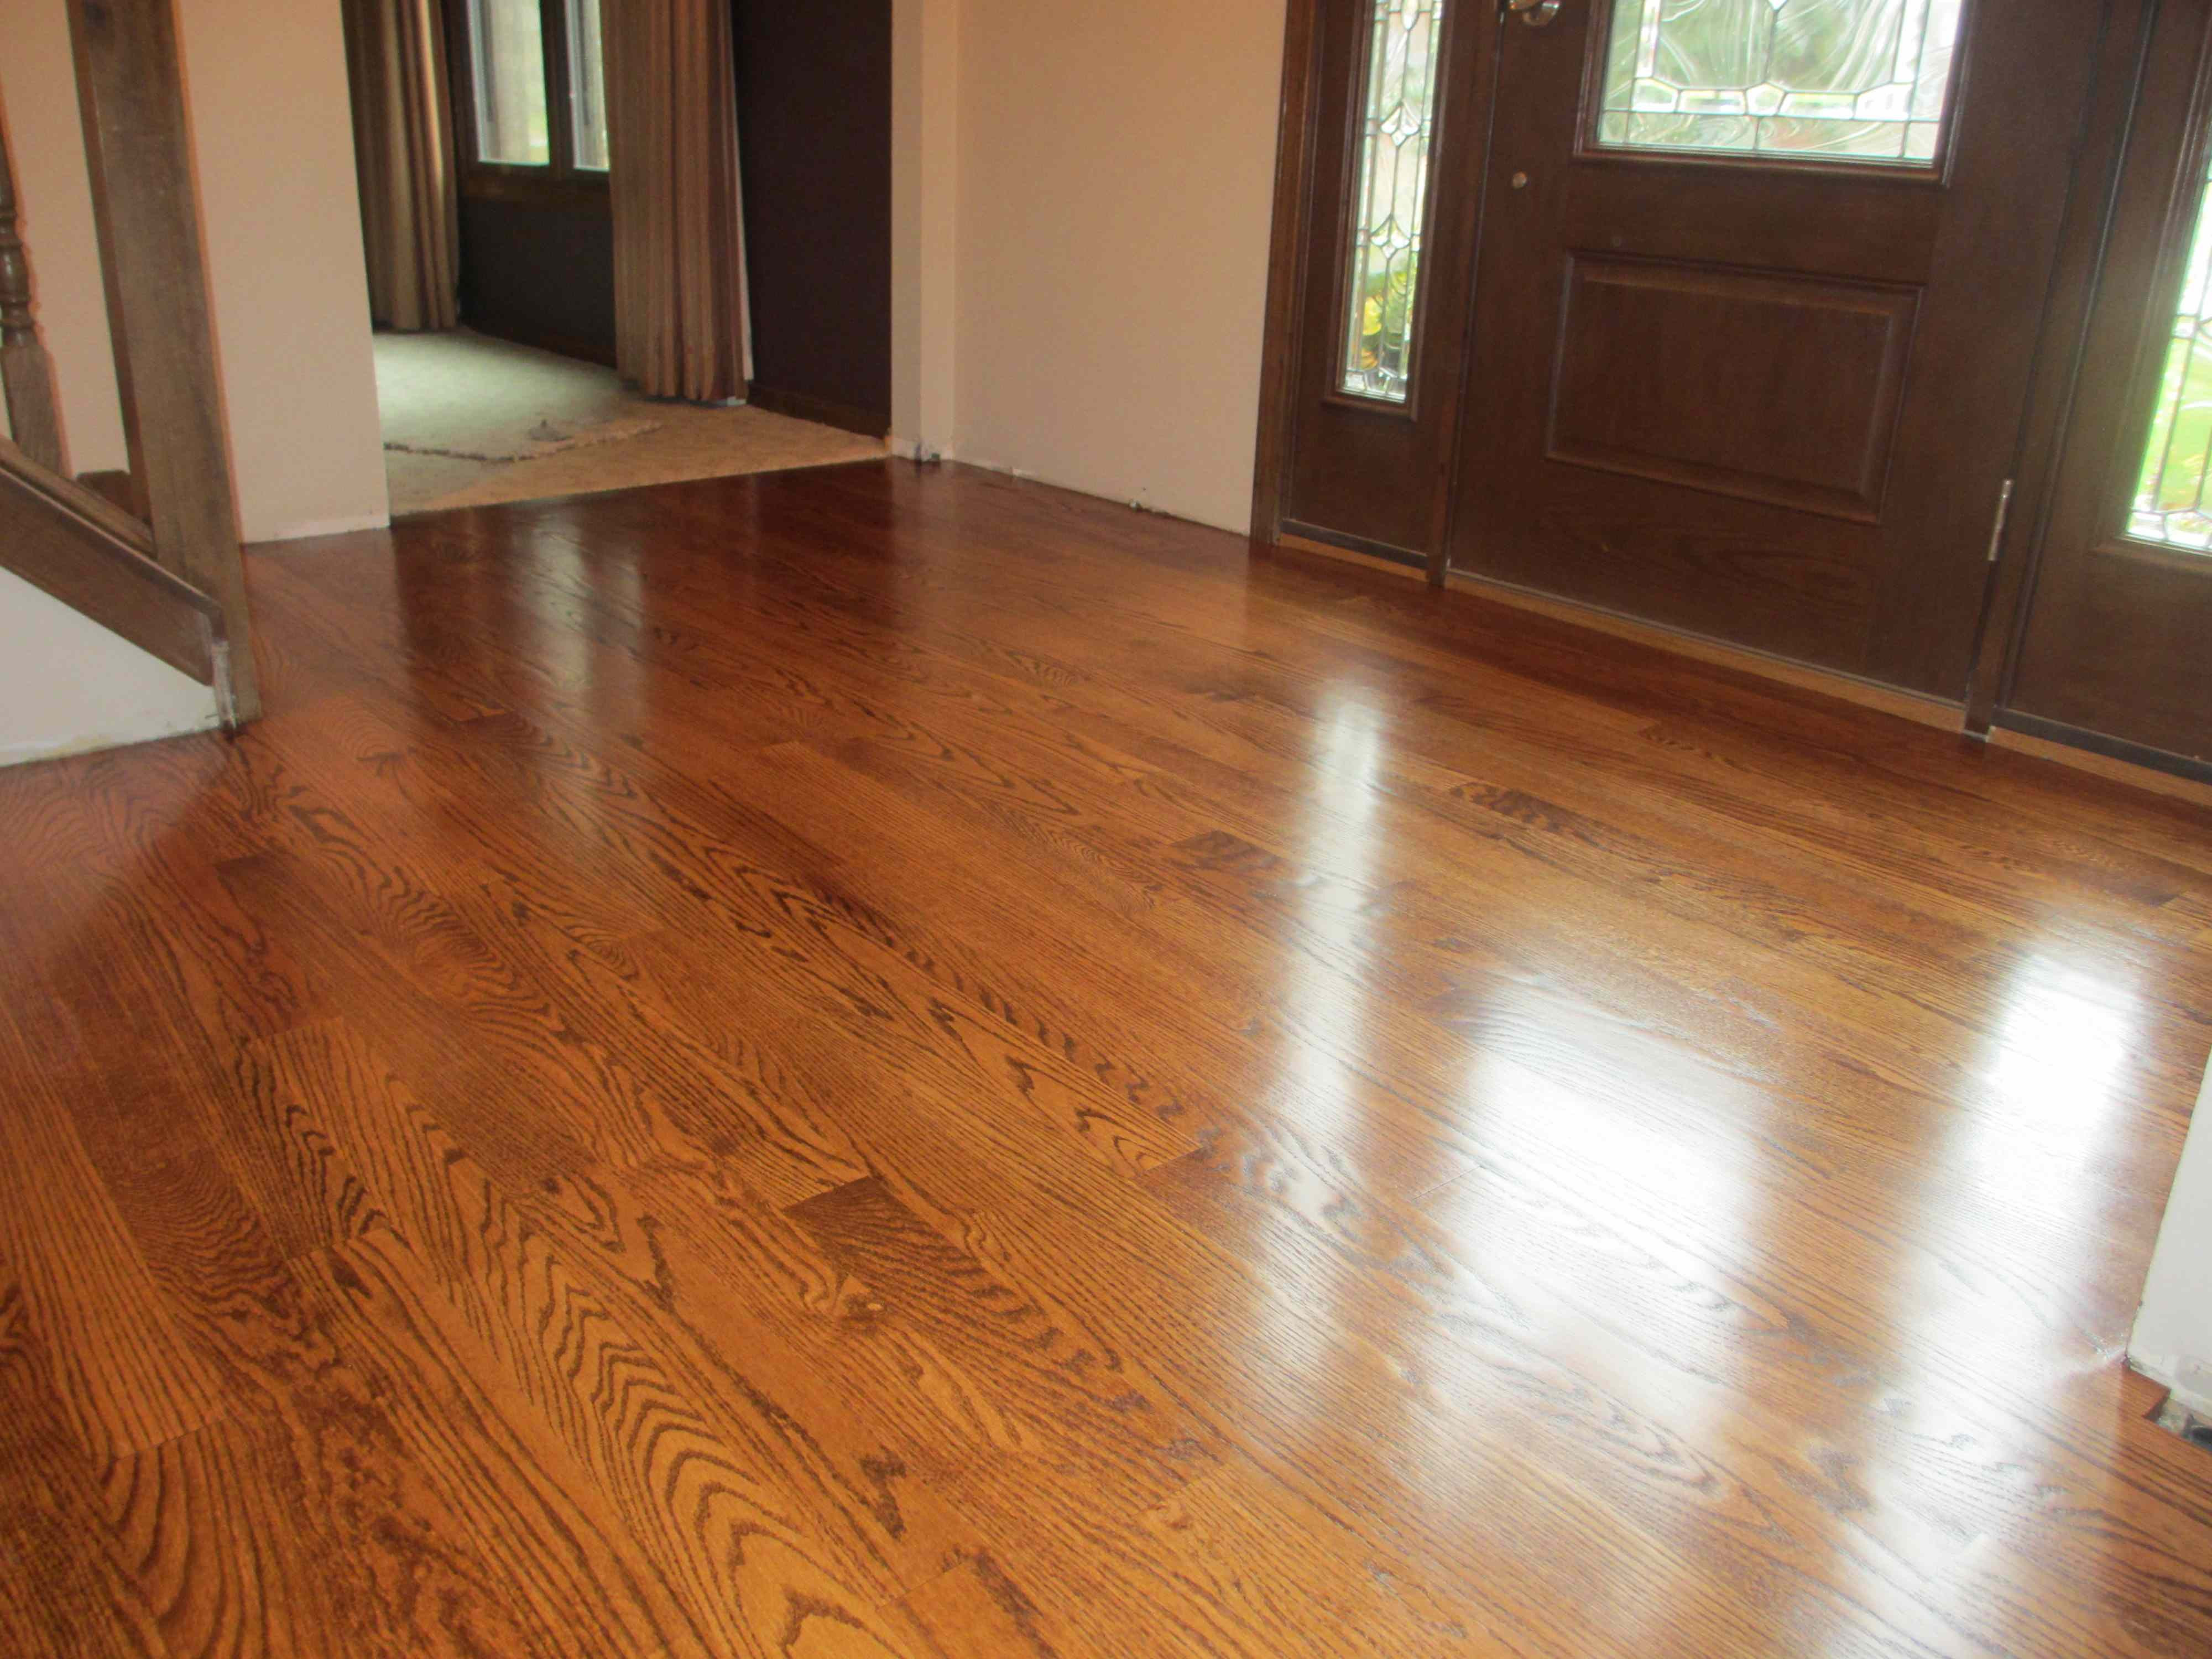 23 Fabulous How Much to Refinish Engineered Hardwood Floors 2024 free download how much to refinish engineered hardwood floors of re sanding hardwood floors cost magnificent ideas cost of with re sanding hardwood floors cost